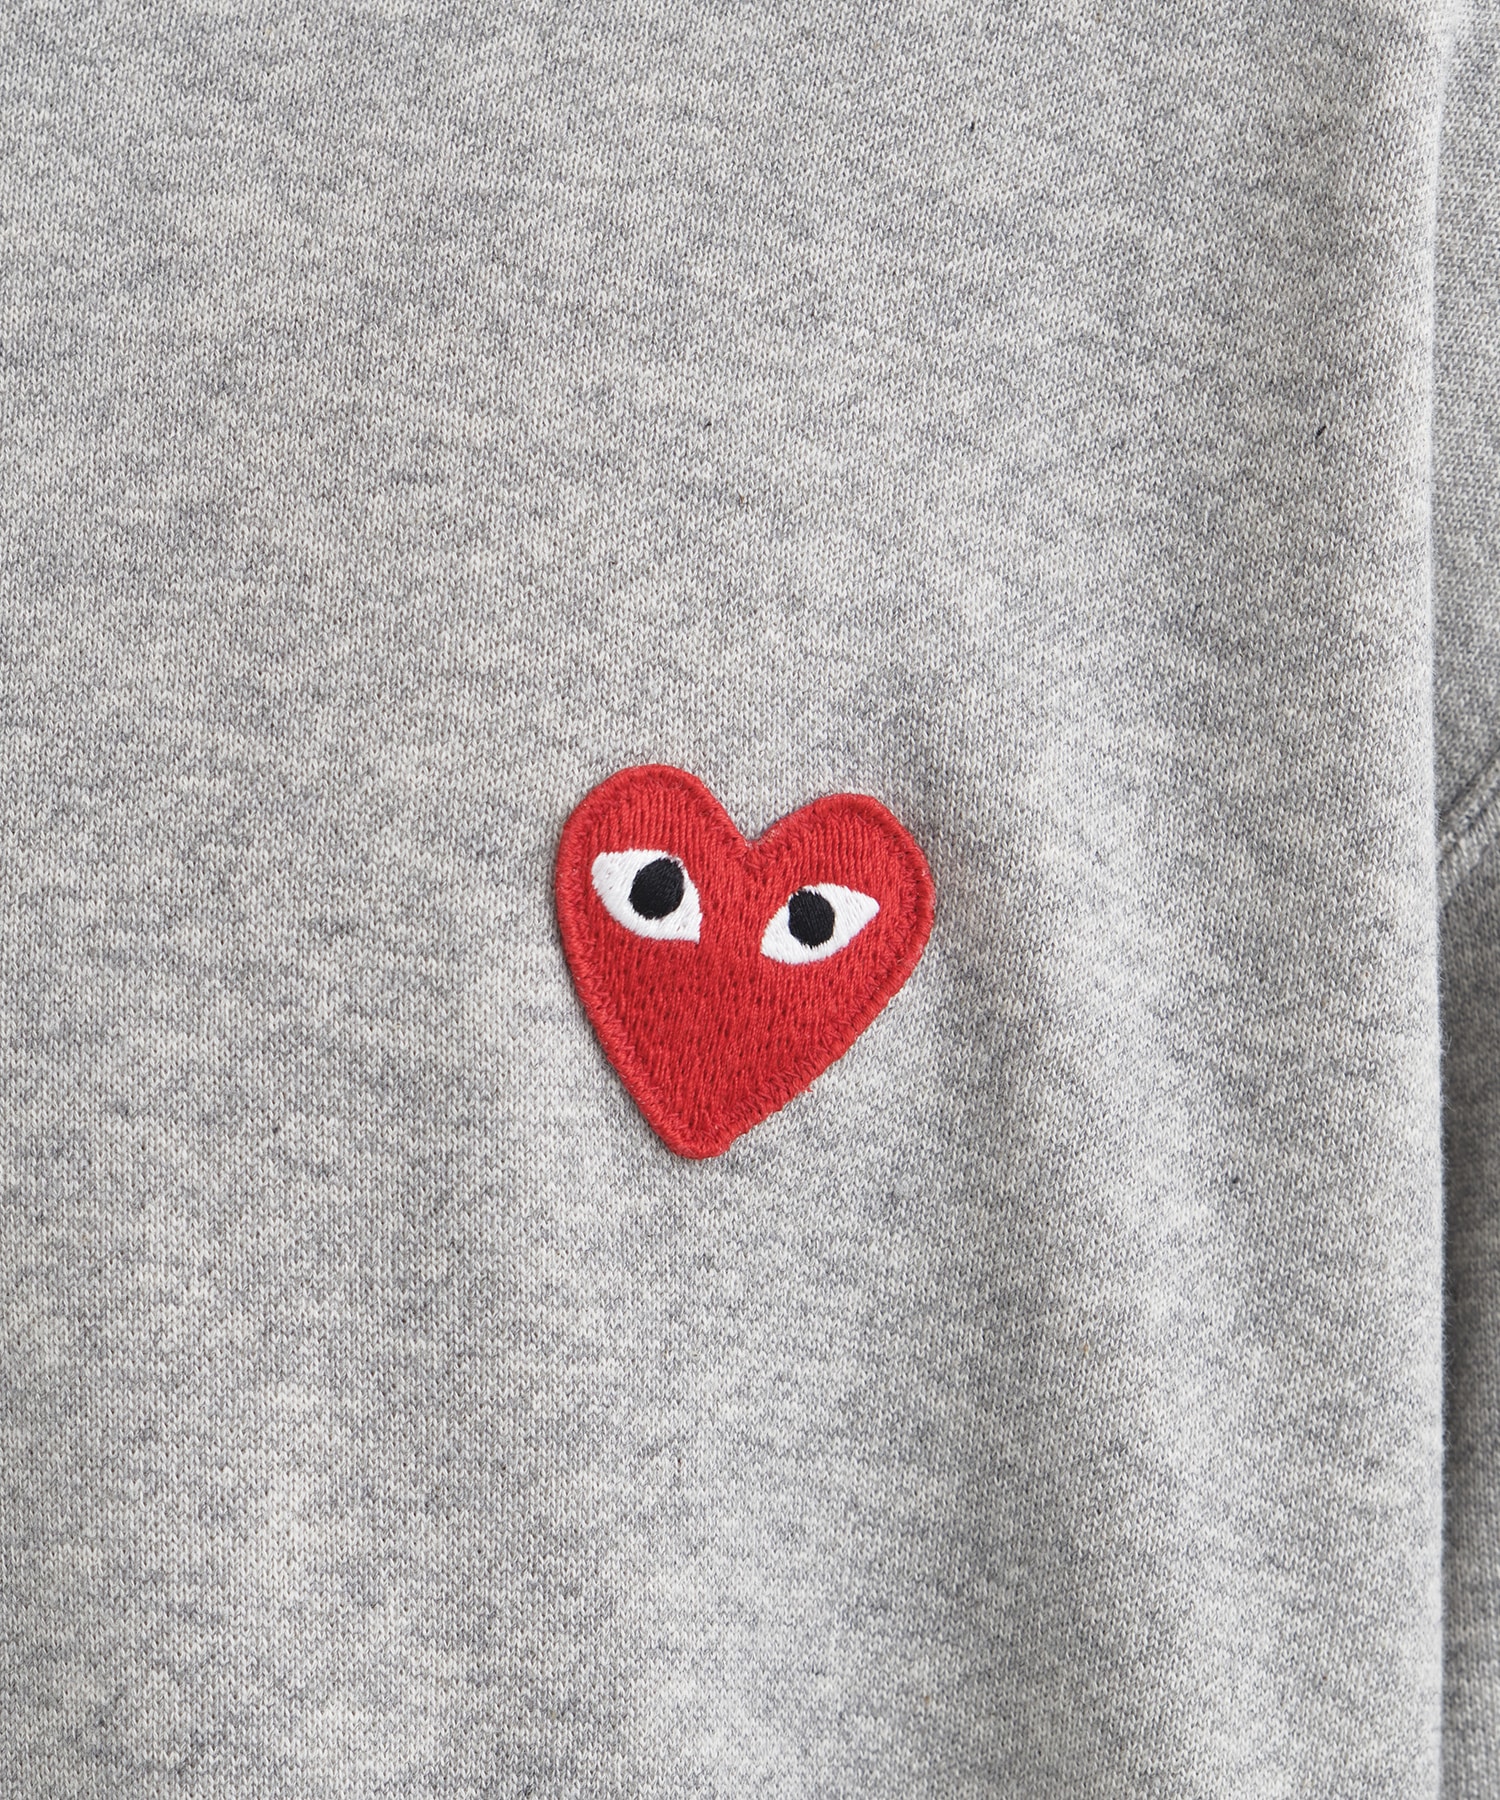 AZ-T170-051 PLAY HOODED SWEATSHIRT RED HEART ｜ PLAY Comme des Garcons